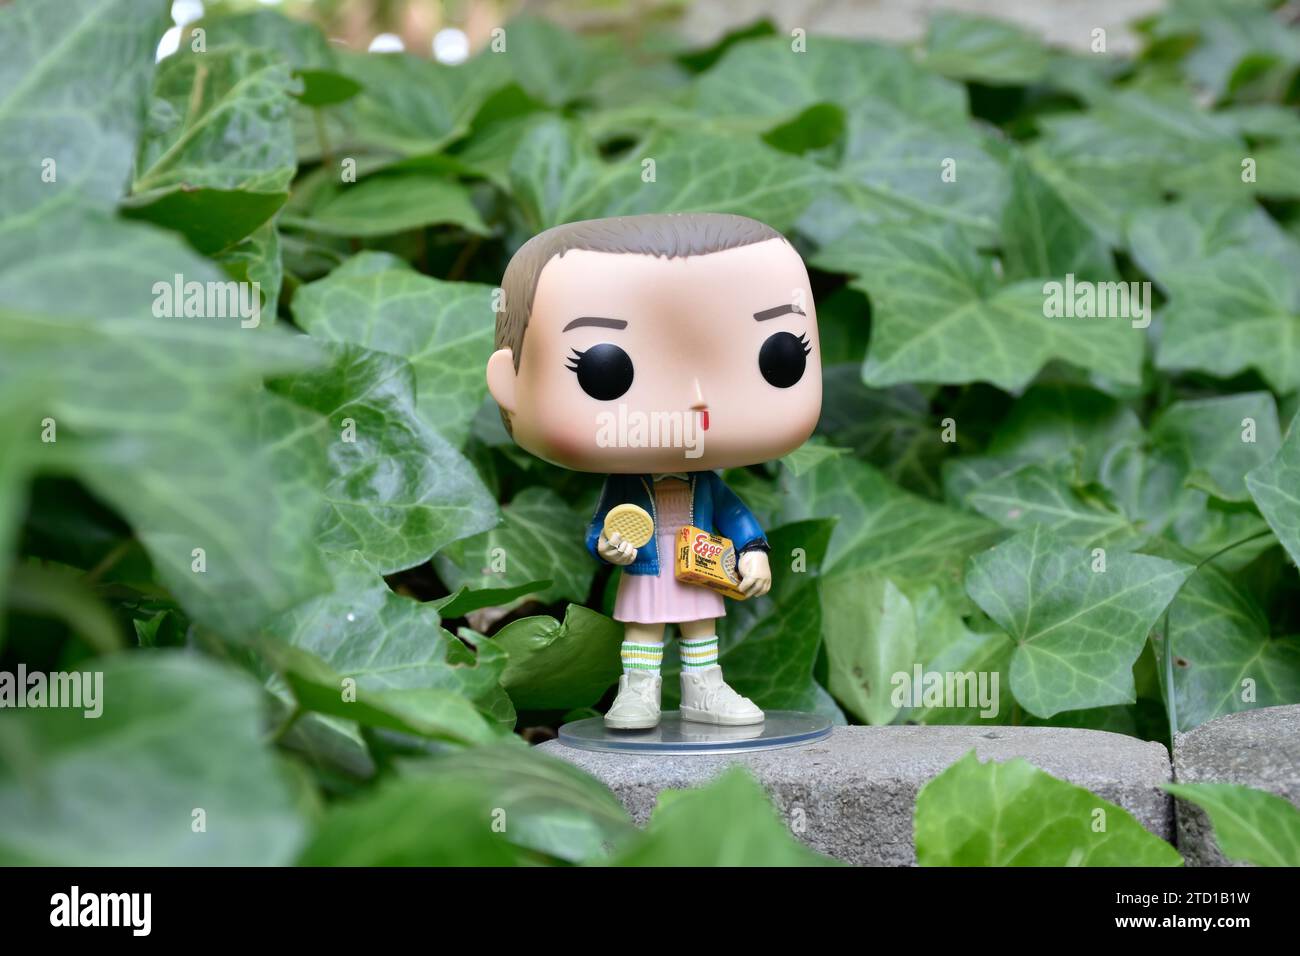 Funko Pop action figure of Eleven with Eggo waffles from Netflix TV series  Stranger Things. Green ivy plant leaves, abandoned garden, mysterious mood  Stock Photo - Alamy